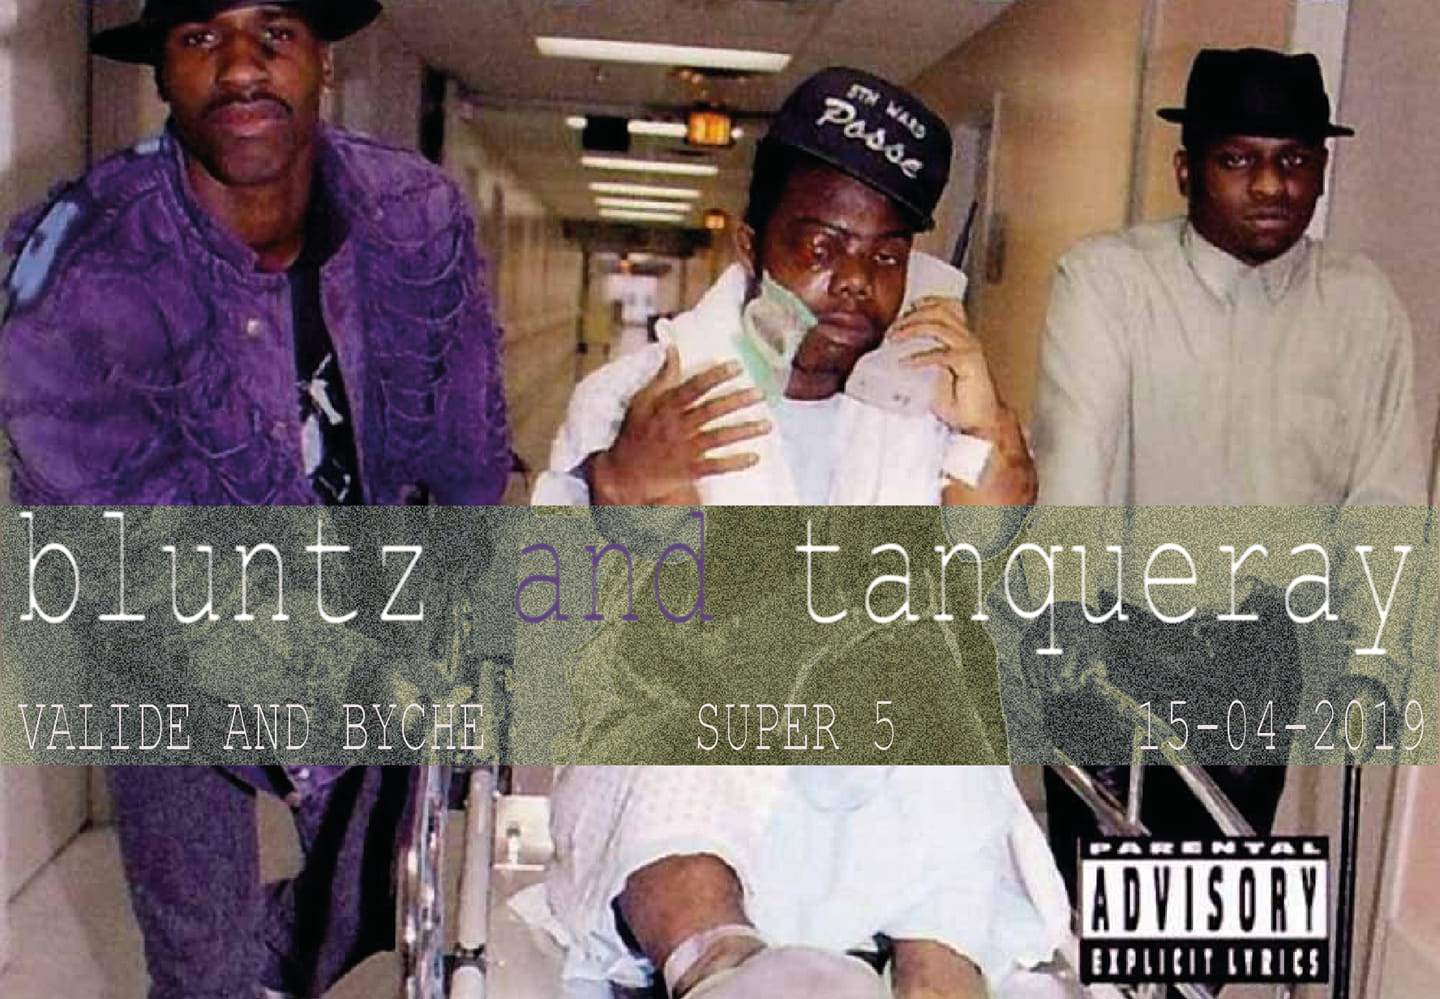 Bluntz and Tanqueray II - フライヤー表